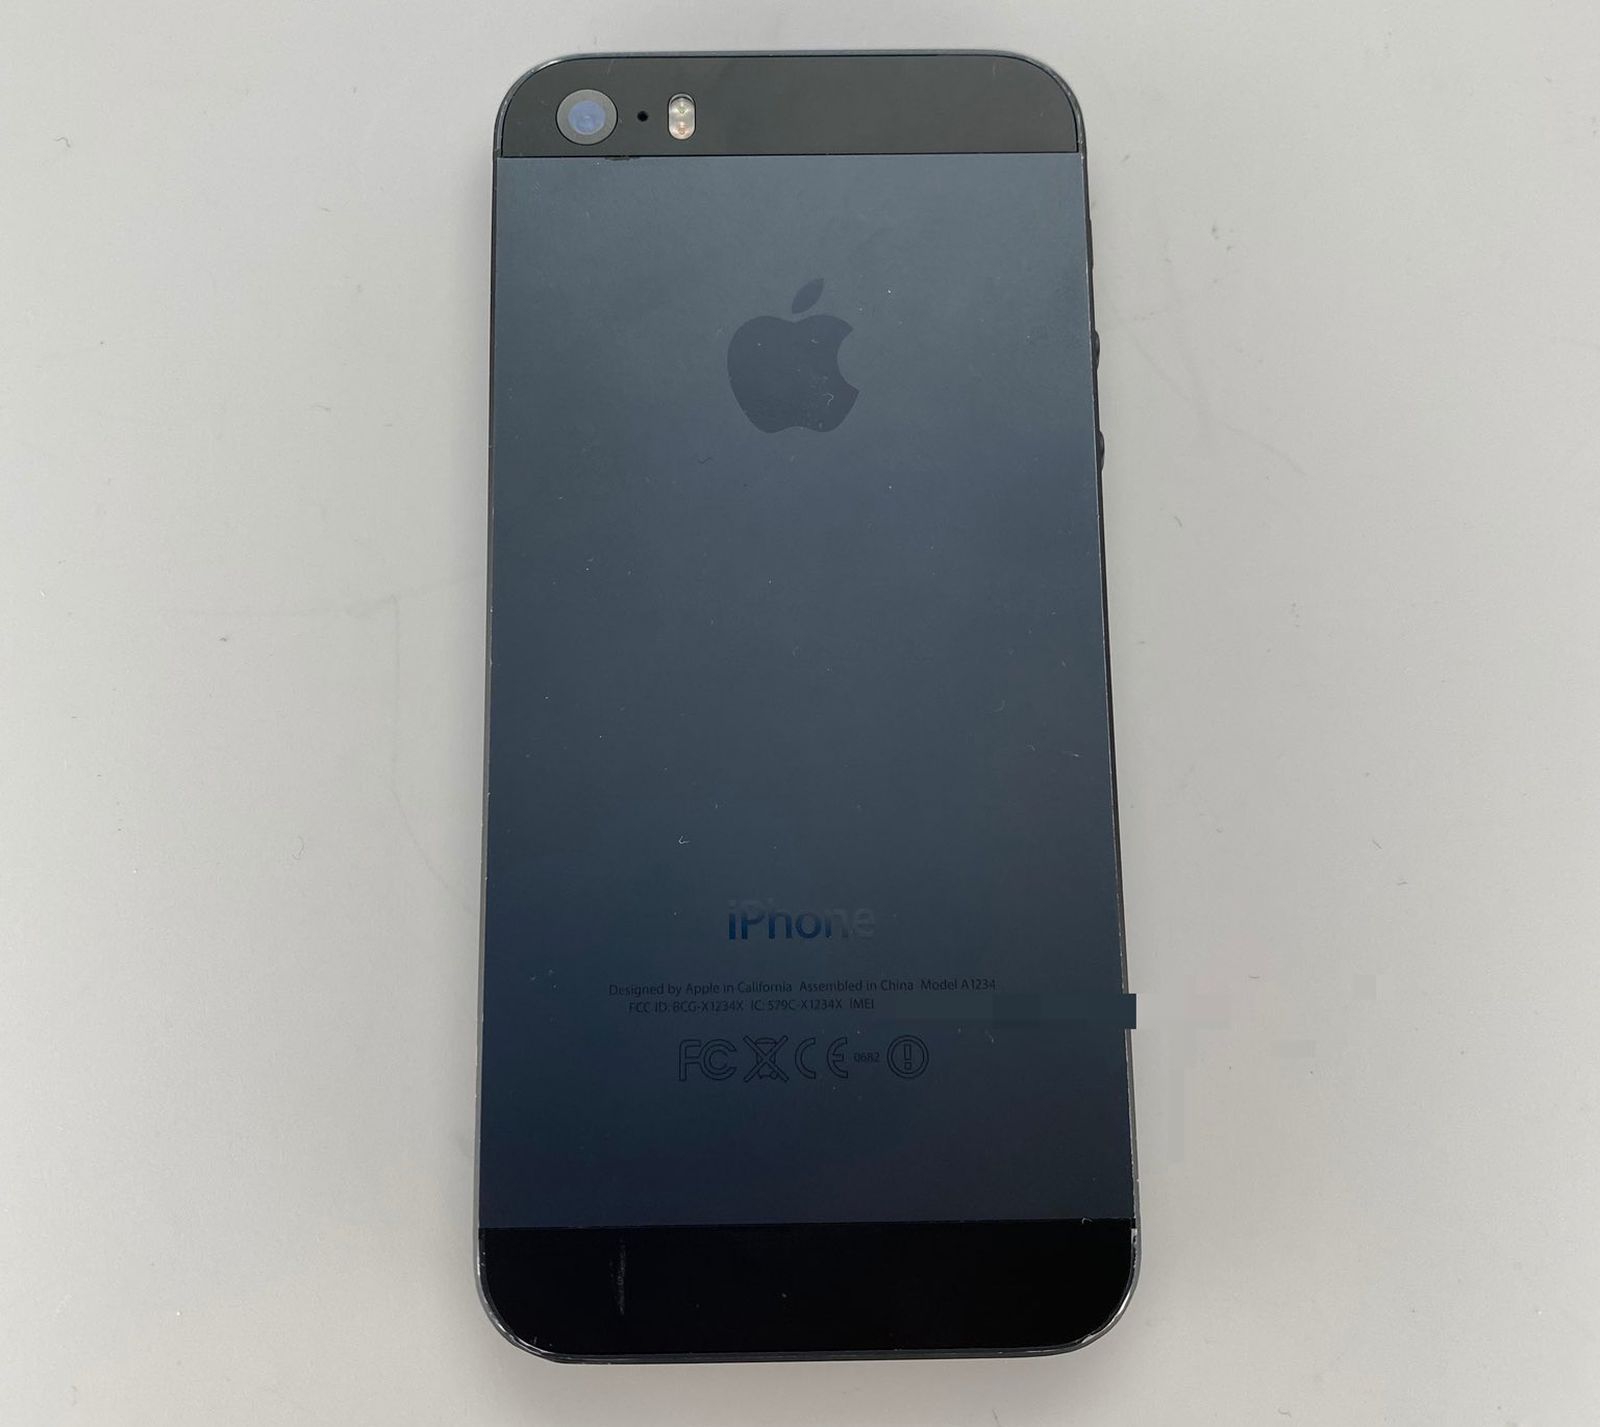 iphone 5s black and graphite